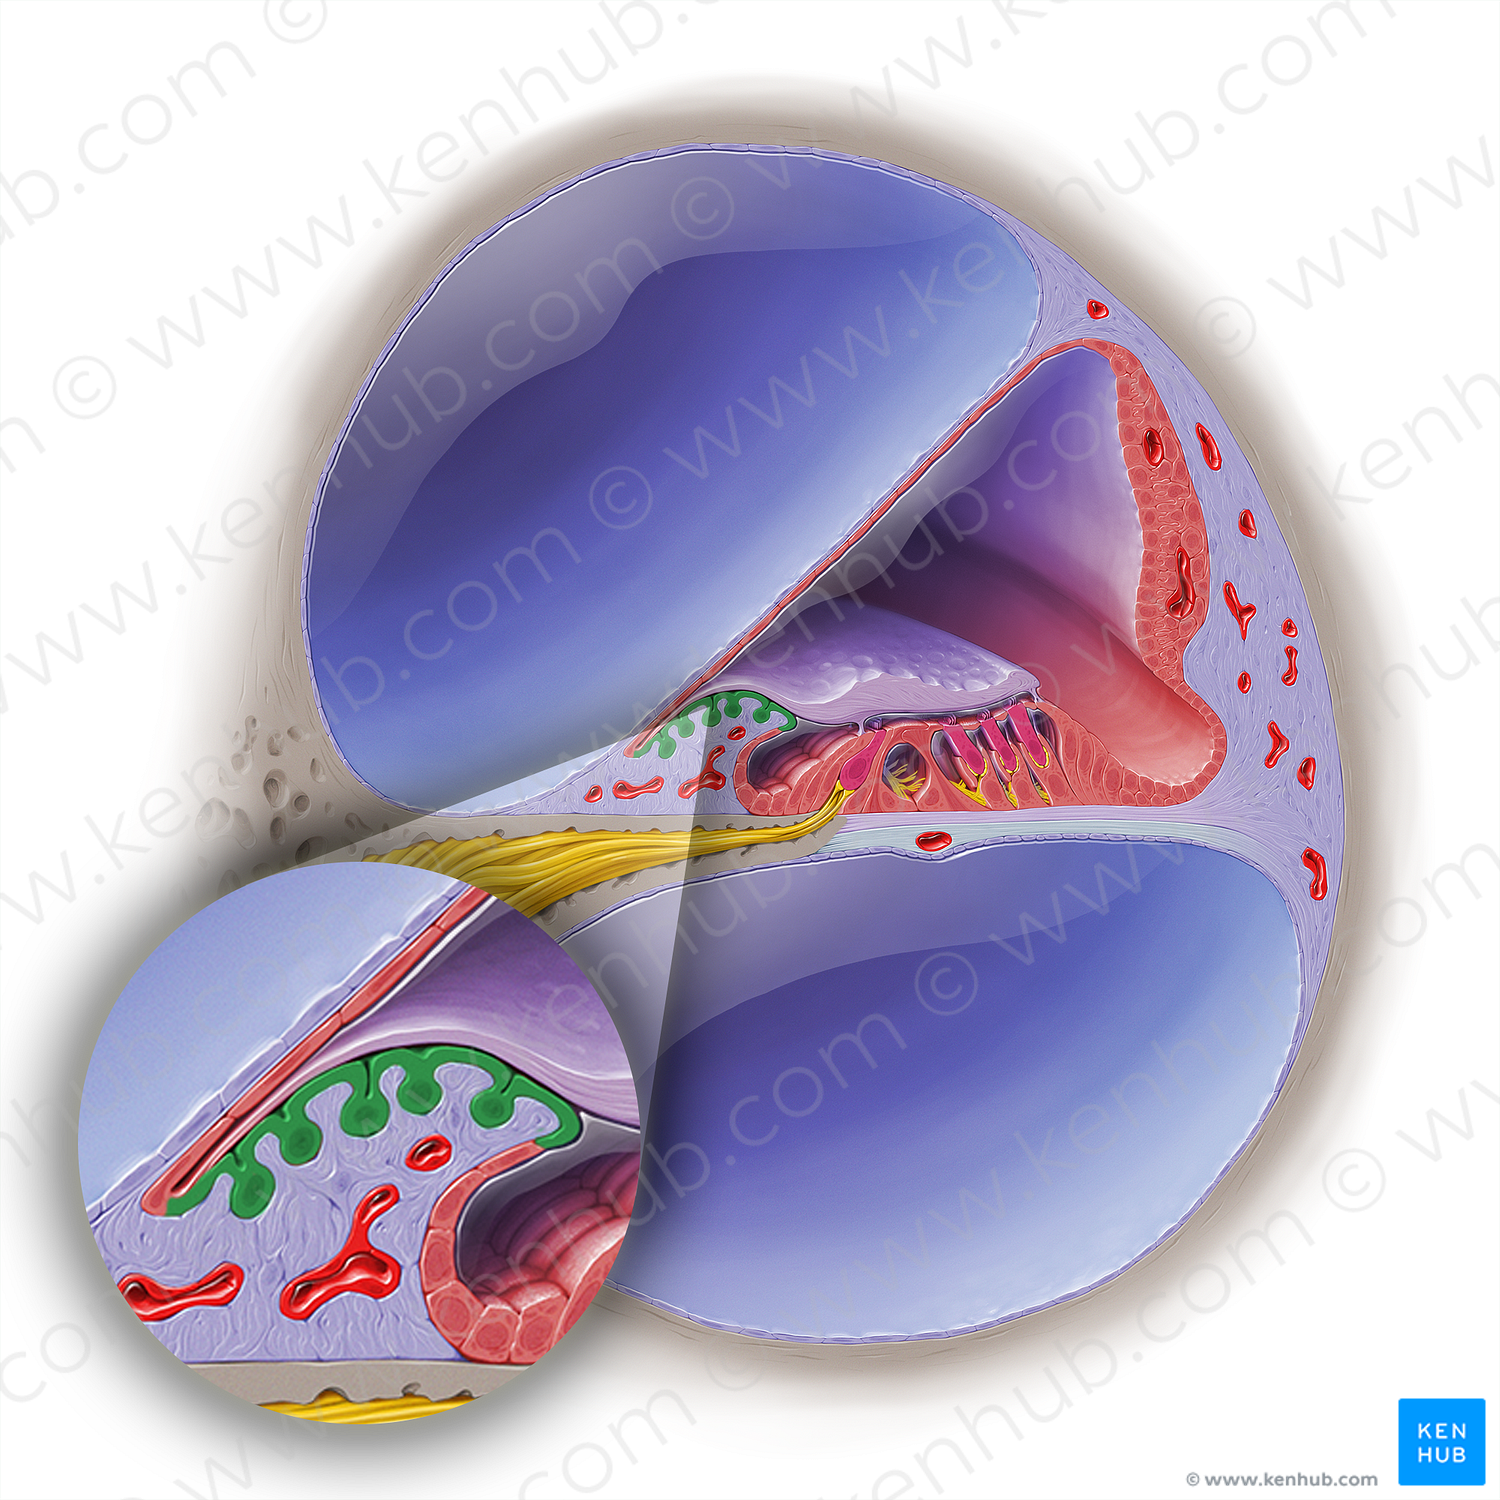 Interdental cells of cochlear duct (#19030)